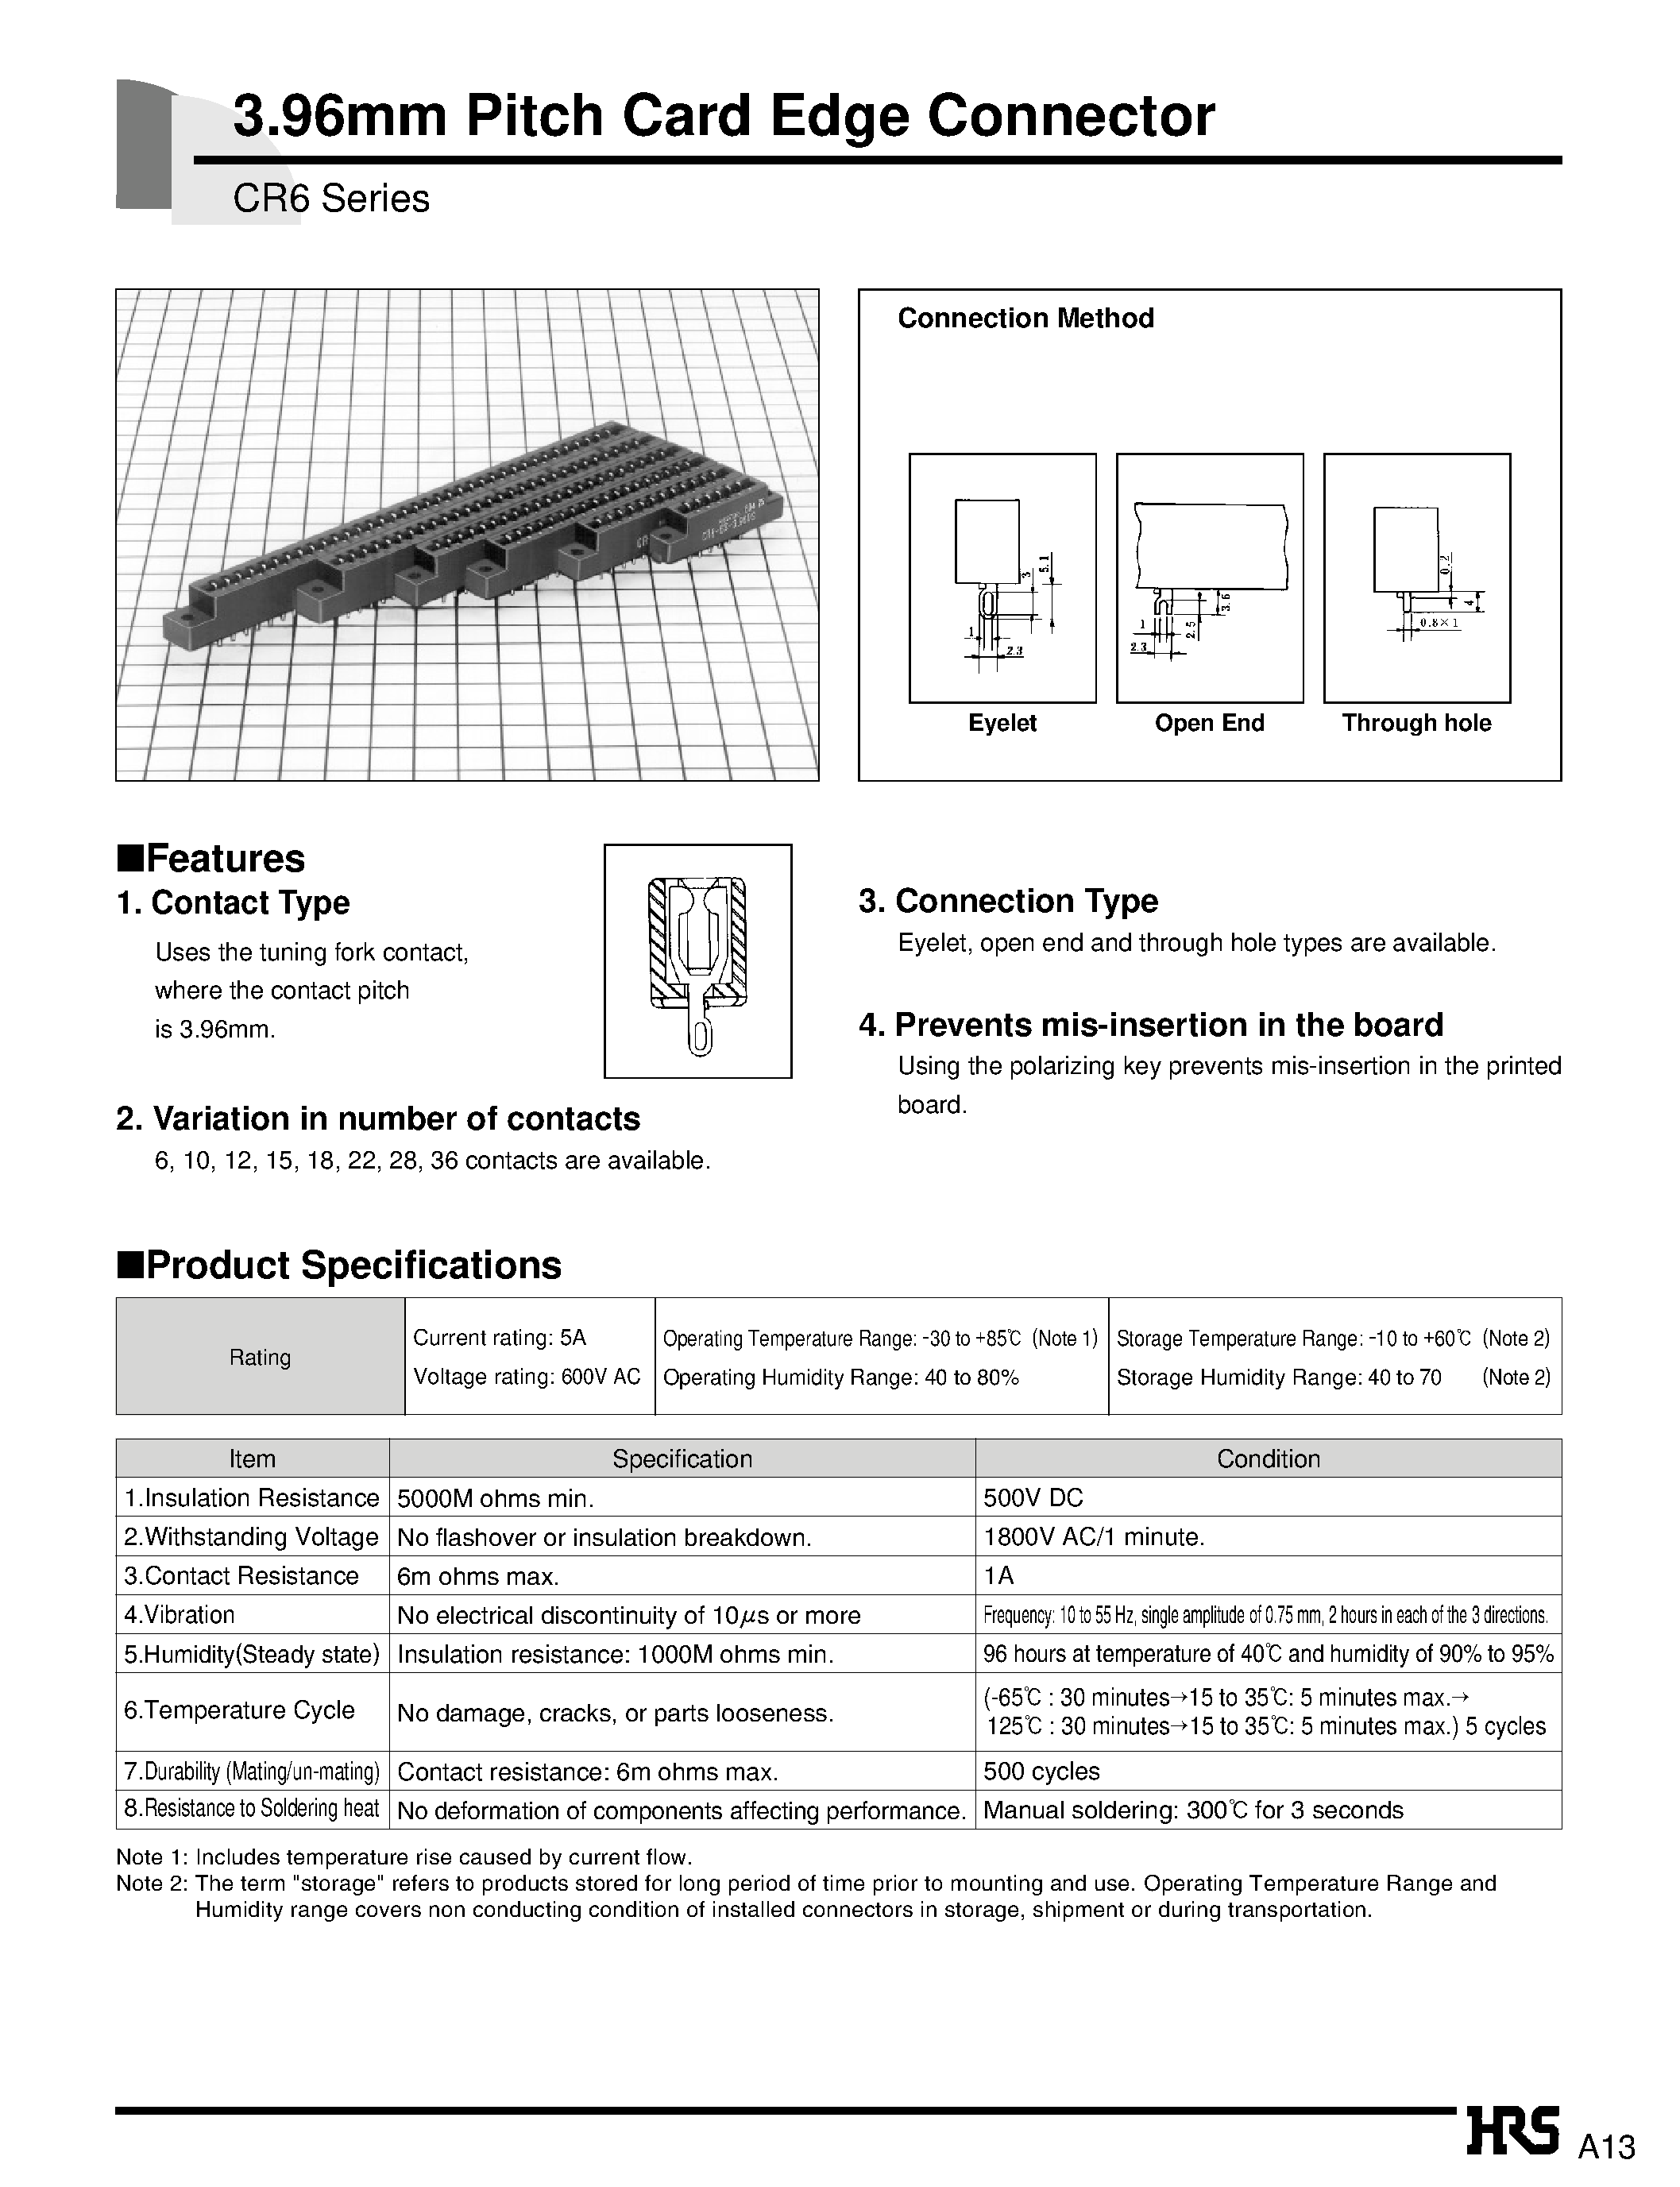 Datasheet CR6-06S-3.96E - 3.96mm Pitch Card Edge Connector page 1